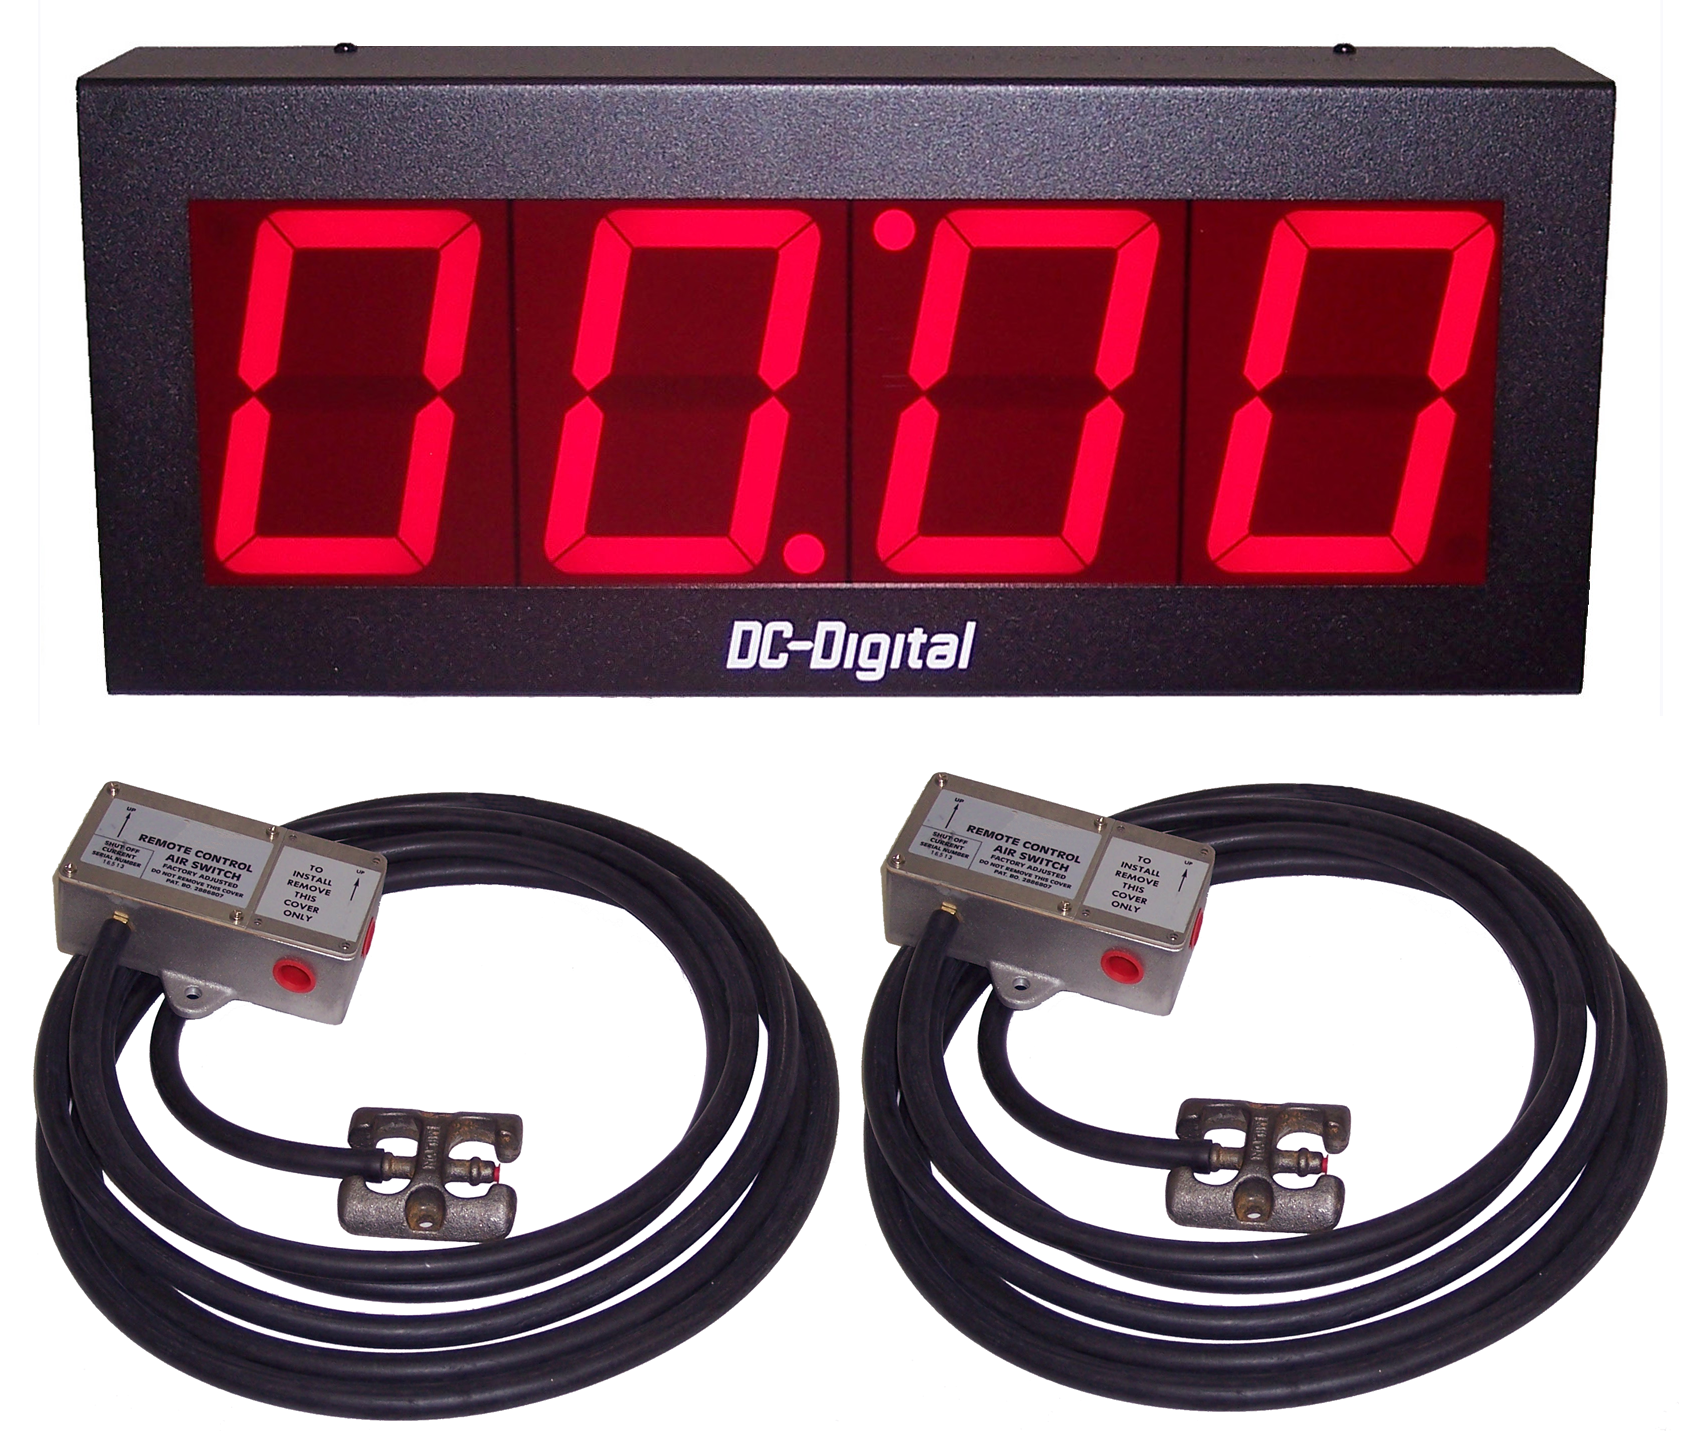 4 inch 4 digit count up elapsed time timer for garages with pneumatic switches